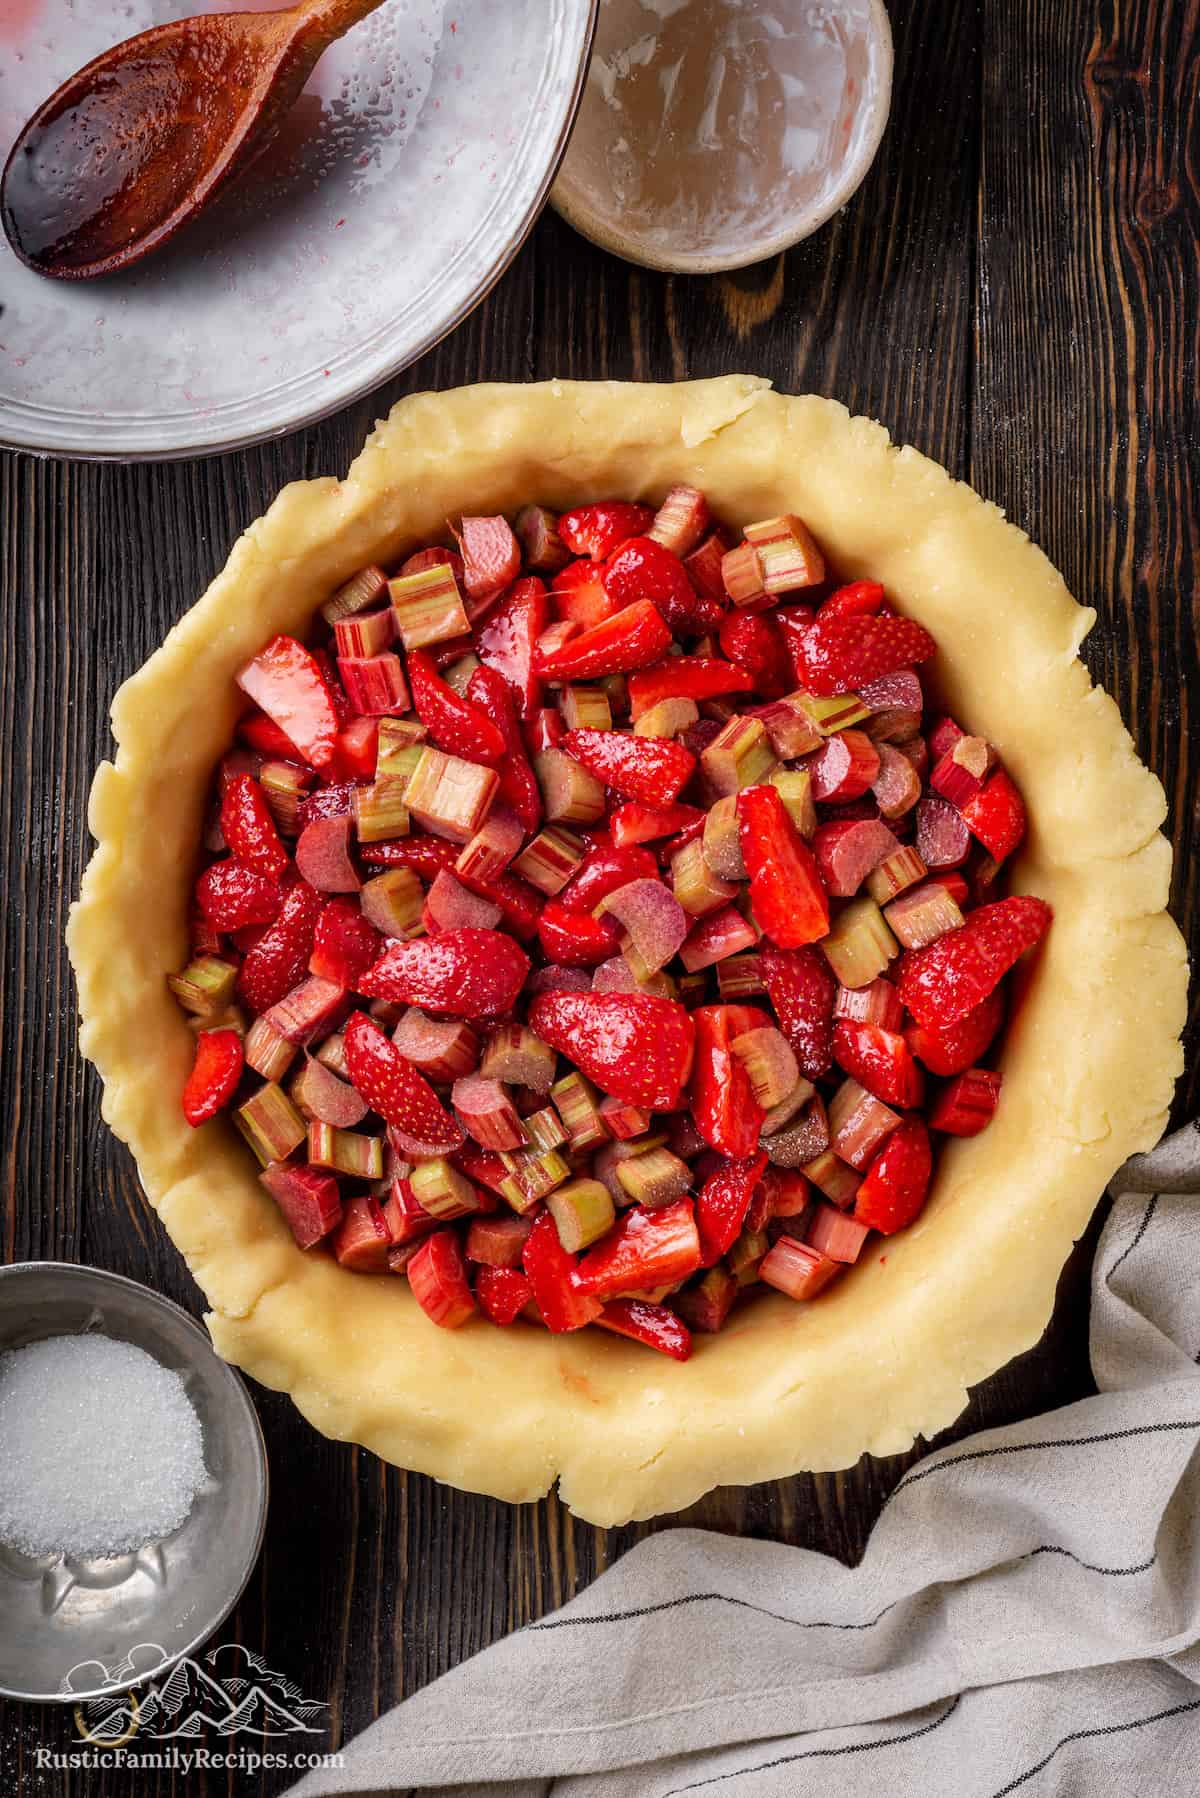 Top view of a pie pan lined with pie crust, filled with strawberry rhubarb filling.